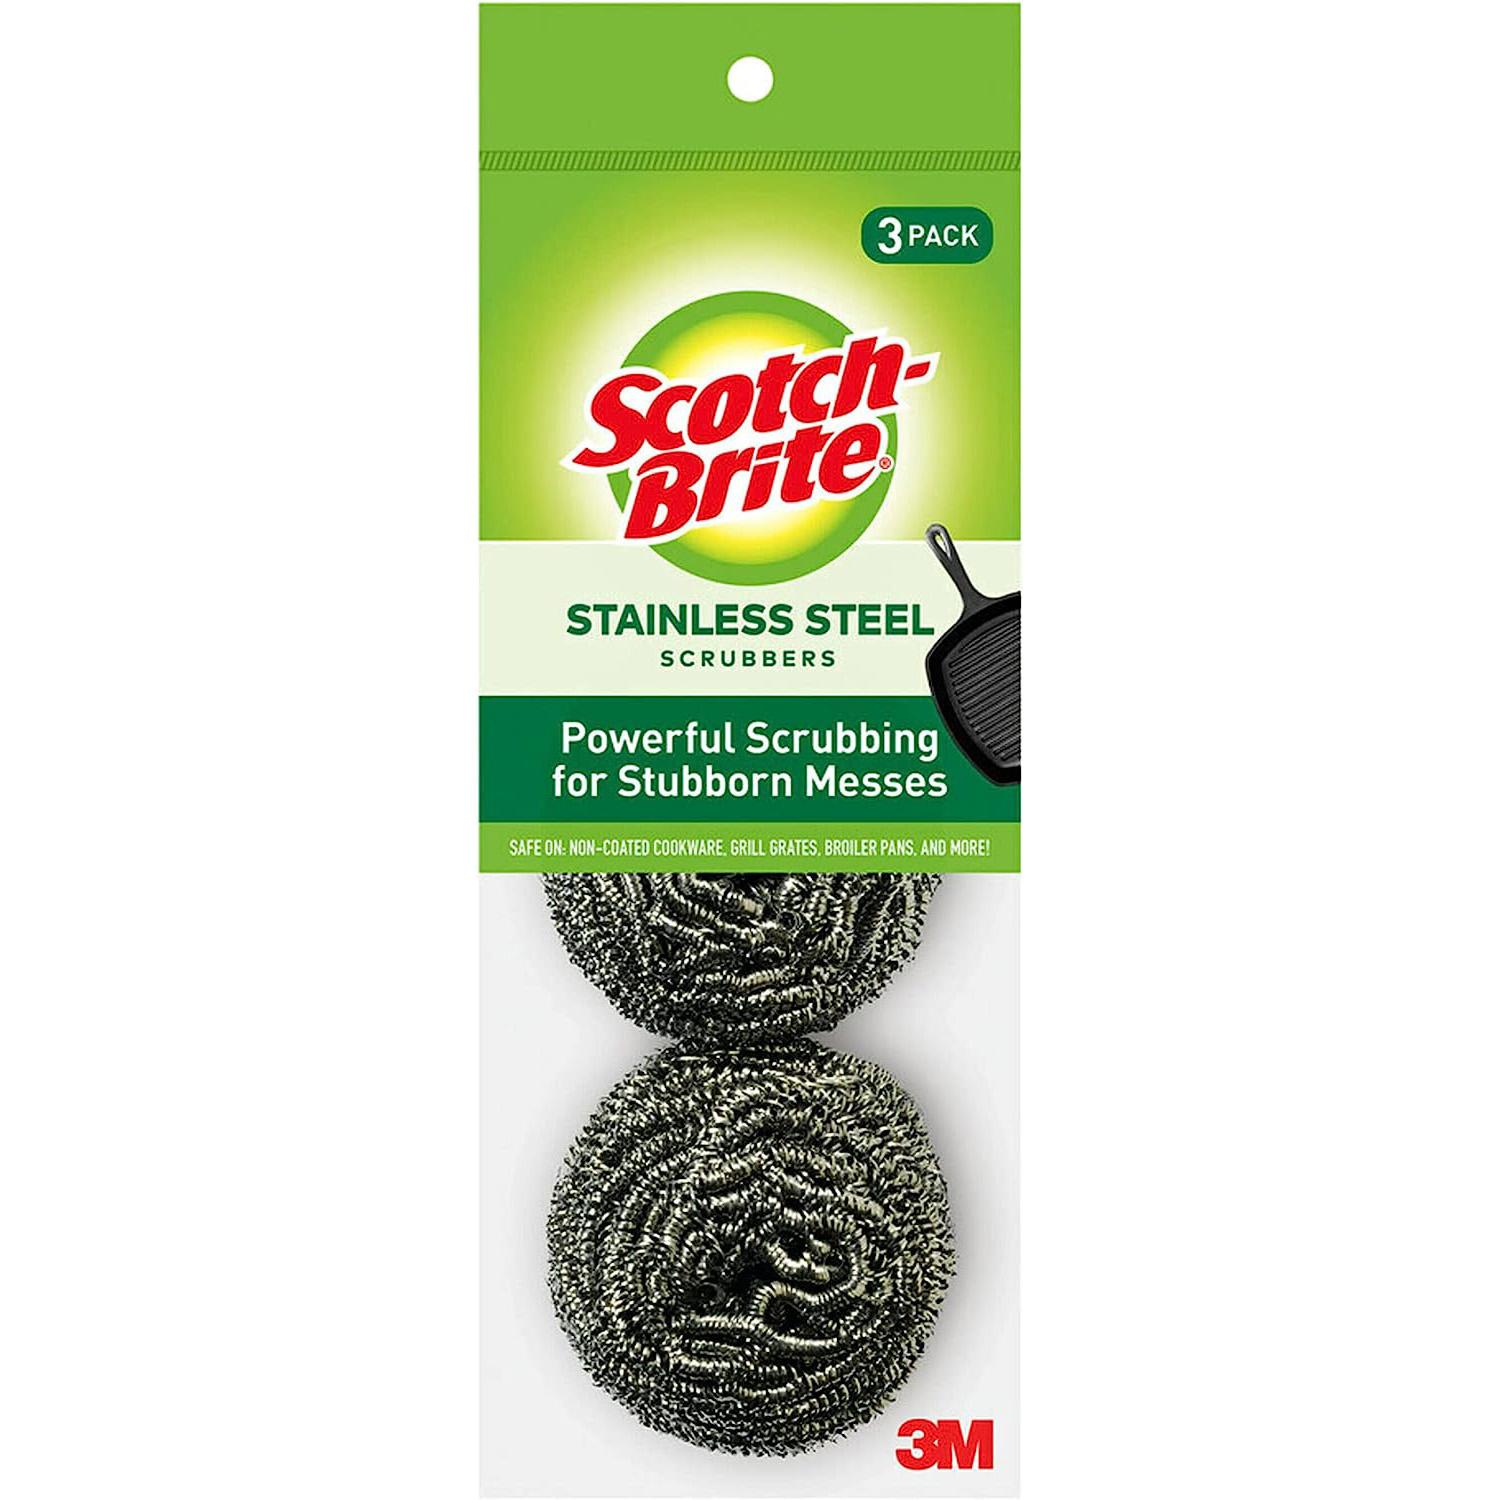 Scotch-Brite Stainless Steel Scrubbers 3 Pack with $0.60 Credit for $2.36 Shipped